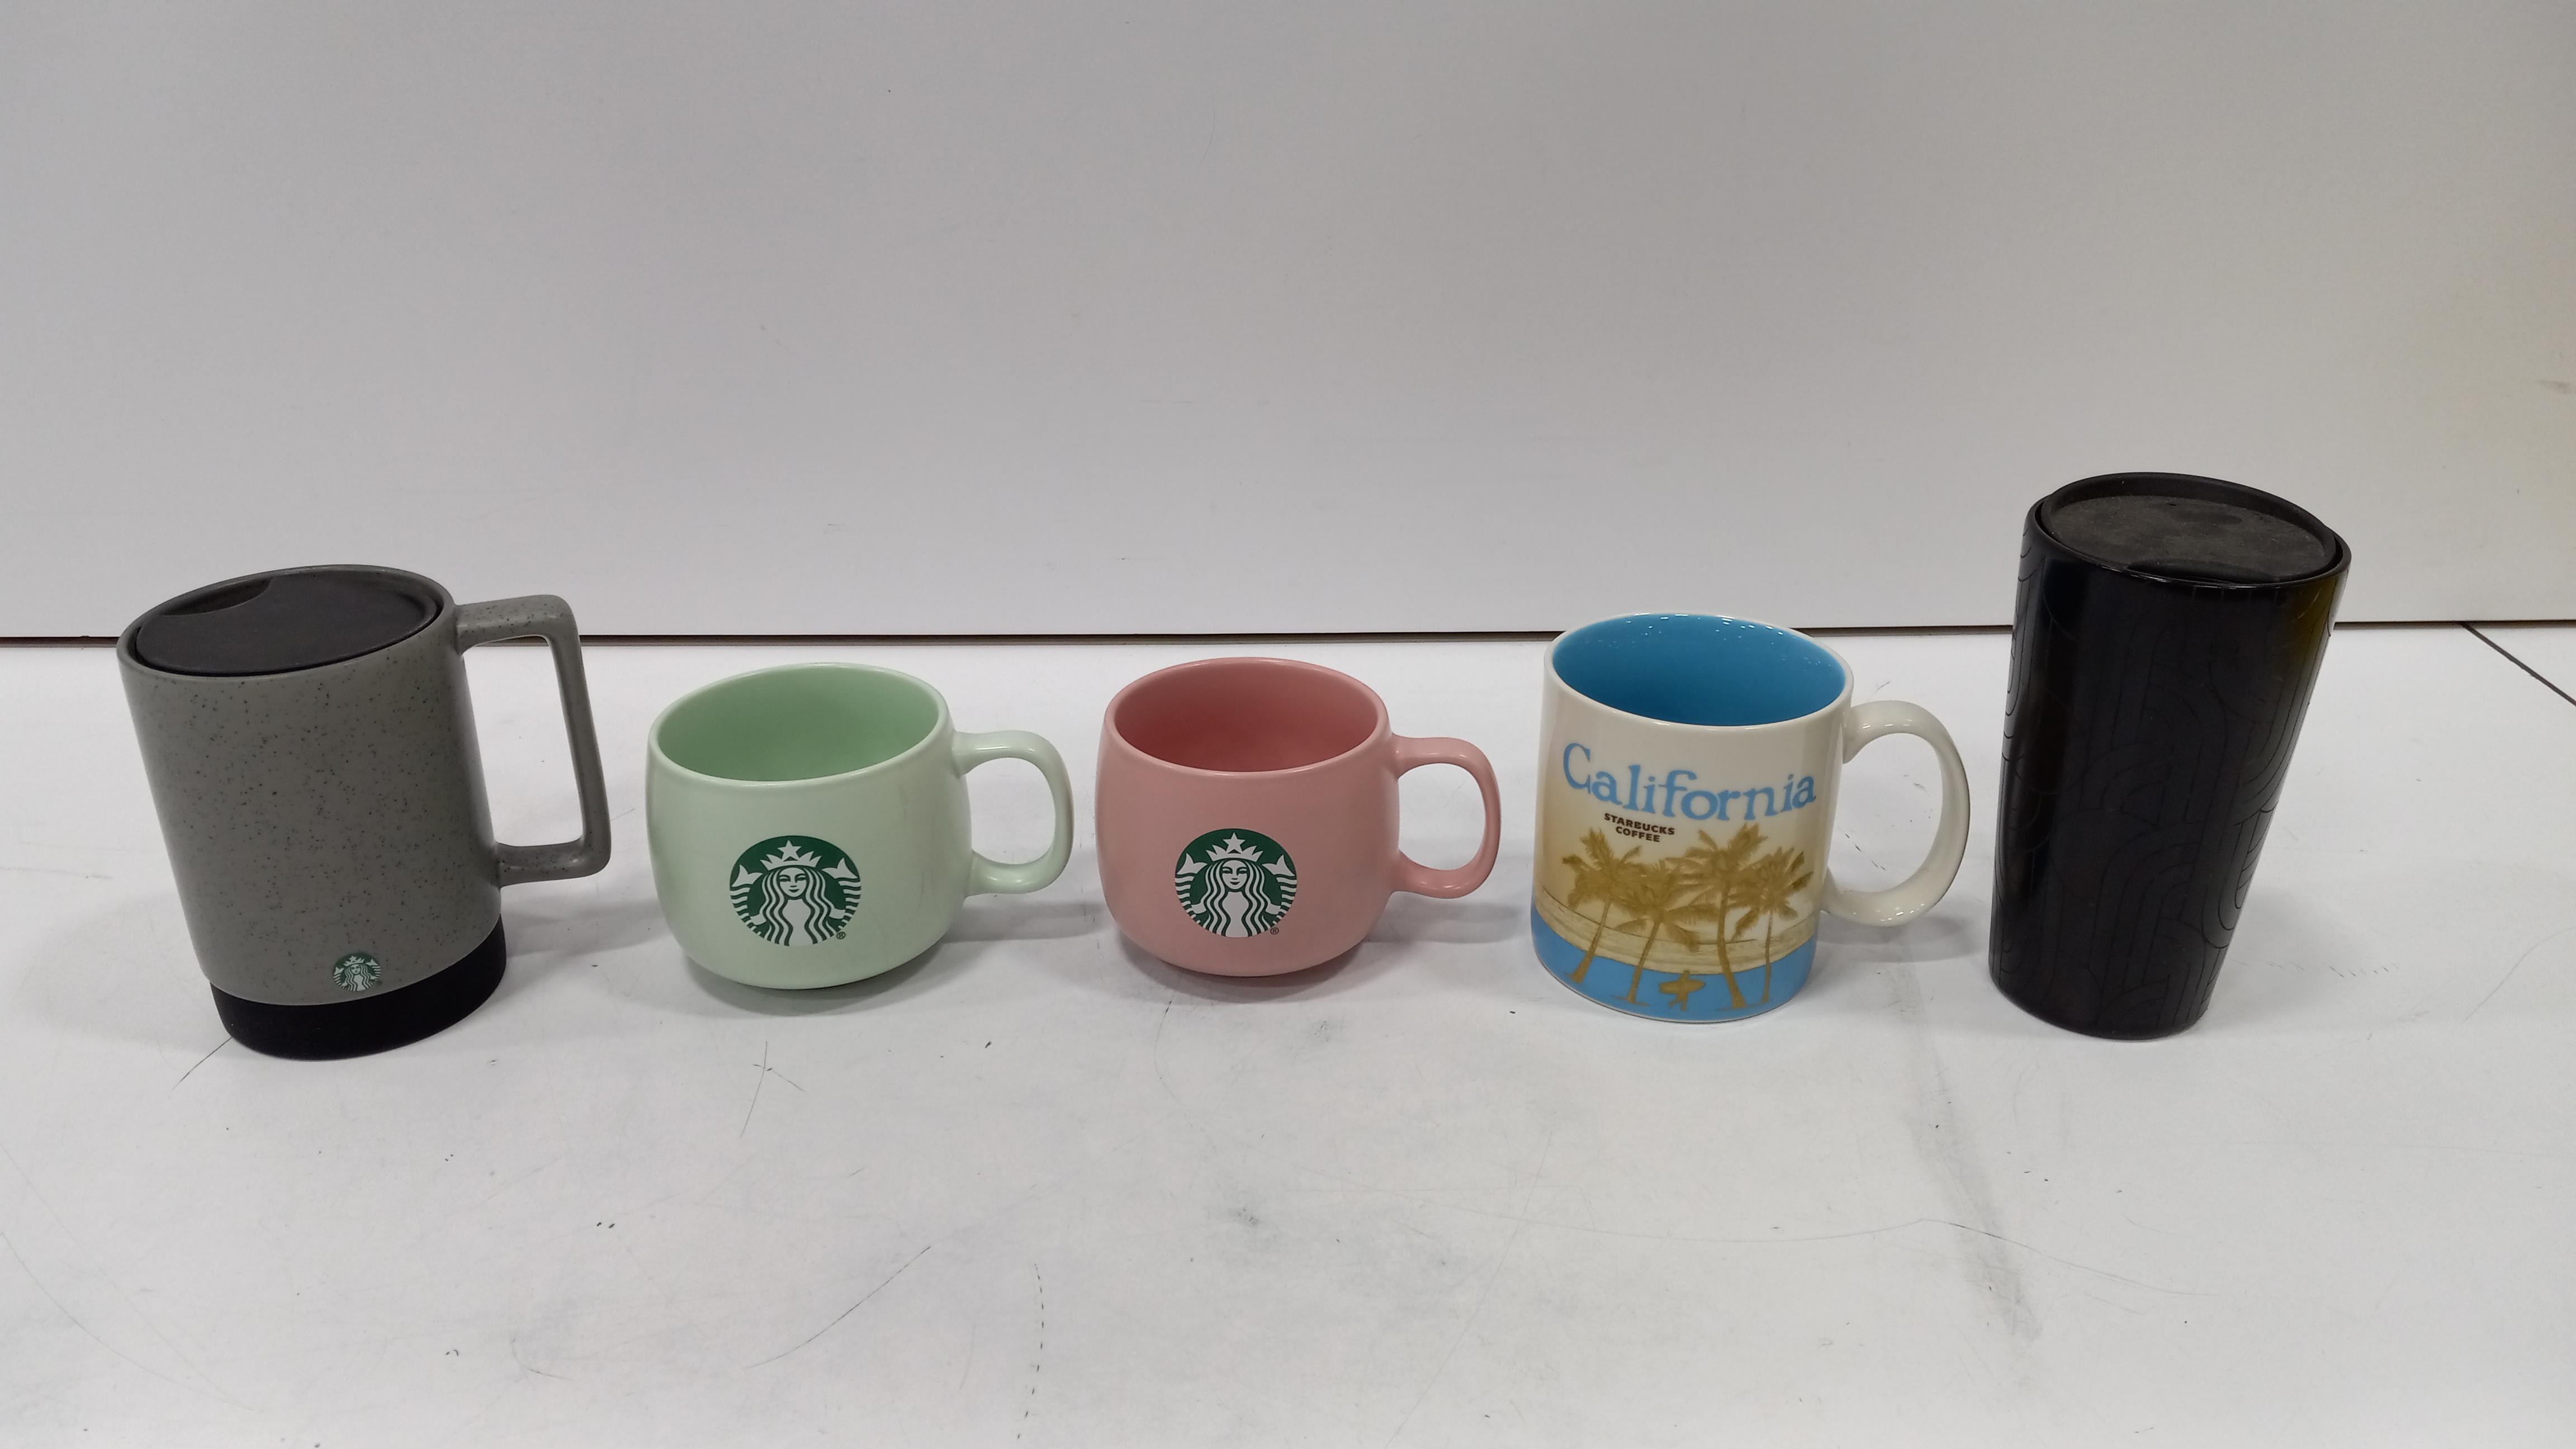 Buy The Bundle Of 5 Assorted Starbucks Ceramic Coffee Cups Goodwillfinds 3147